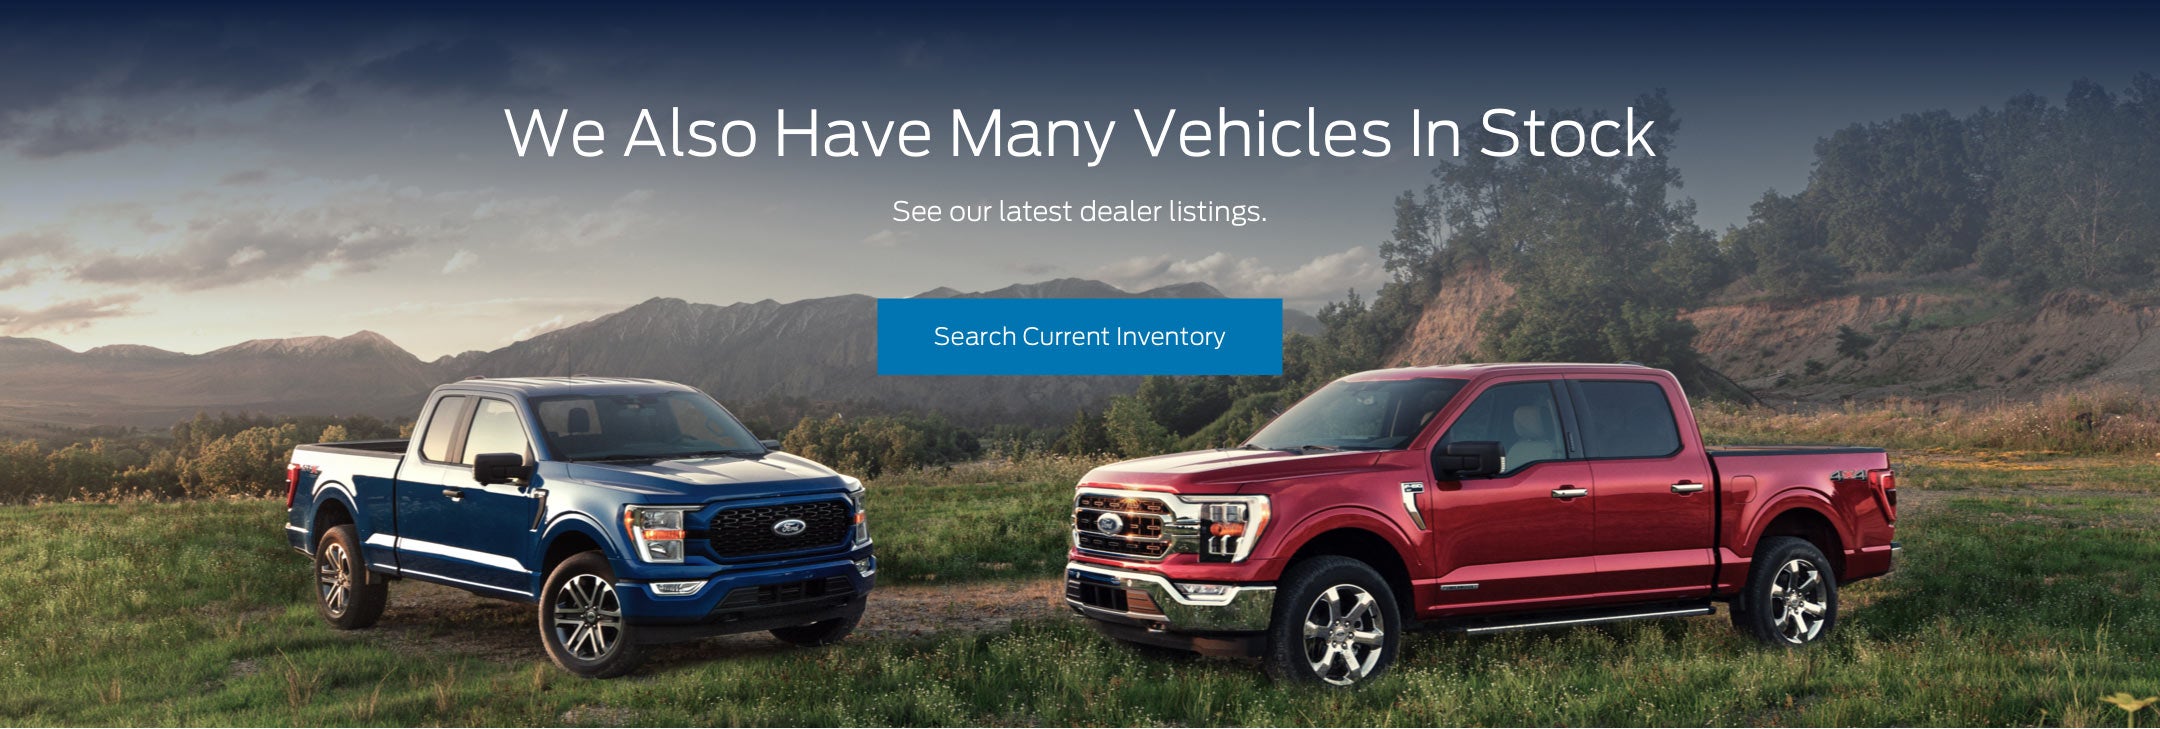 Ford vehicles in stock | Griffith Ford Seguin in Seguin TX